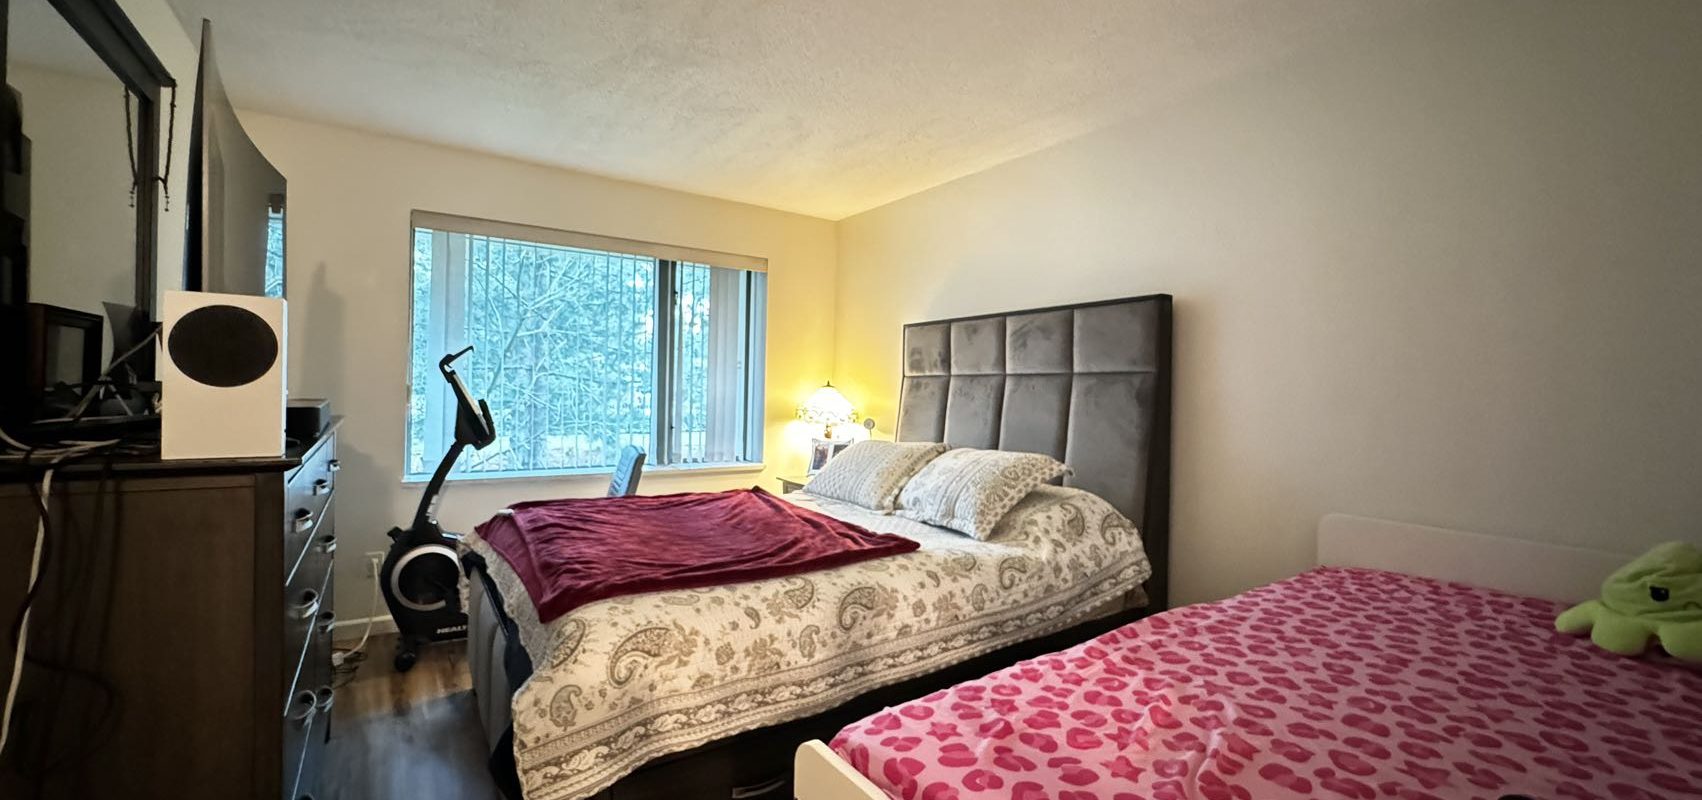 Prime South Burnaby location 2BR/2BR Condo For Rent